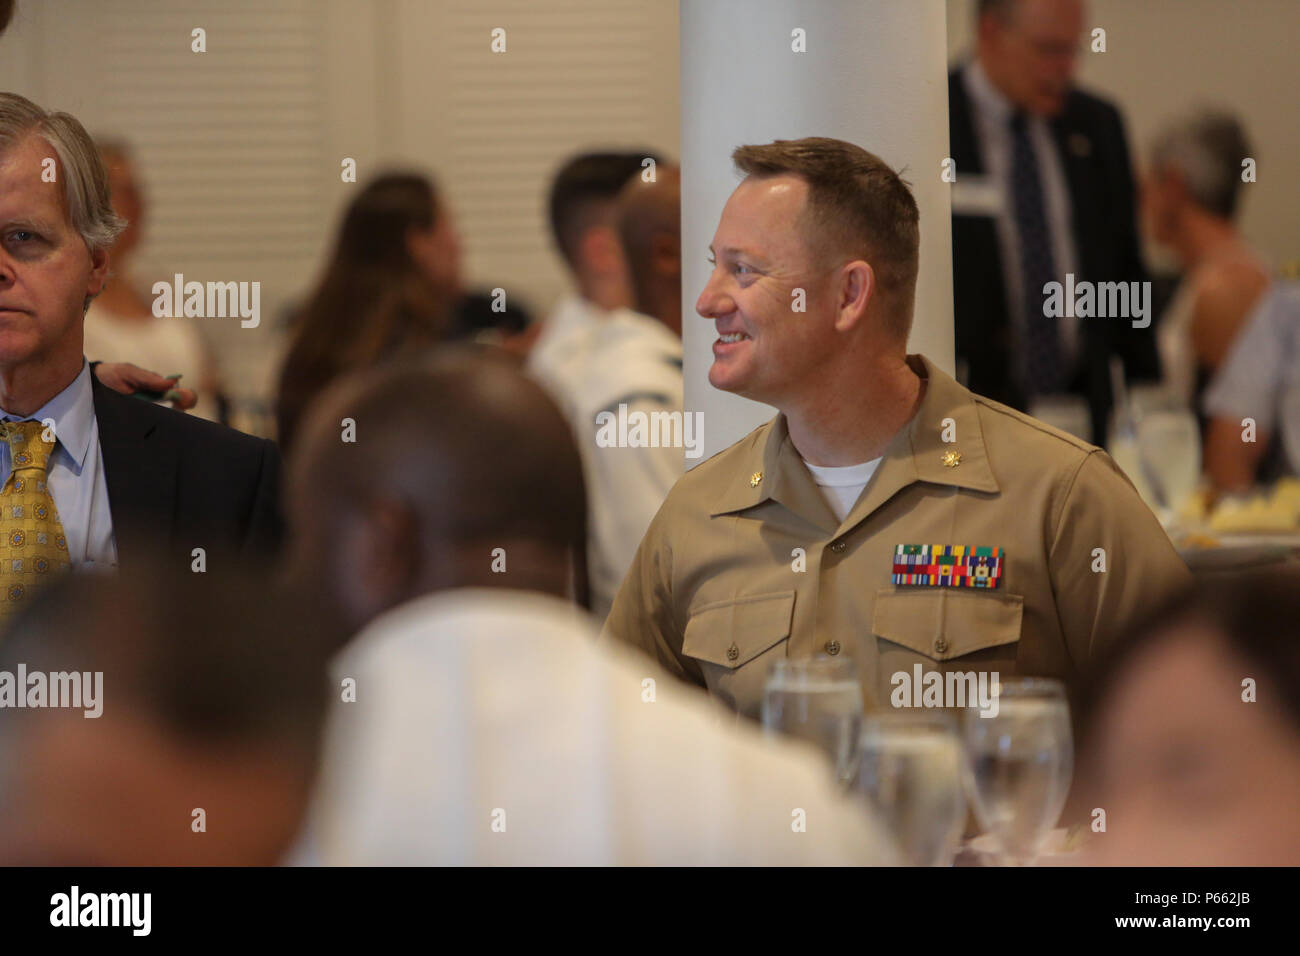 Maj. Andre LaTaste, the Marine Forces Command programing officer, speaks to the Port Everglades Association during a Fleet Week luncheon, May 6, 2016. Fleet Week, which takes place in Fort Lauderdale, Fla., from May 2-8, will give the community of South Florida the opportunity to interact with the Marines and Sailors of the ship as well as see up-close and personal some of the capabilities and equipment the Marine Corps employs. (U.S. Marine Corps photo by Cpl. Michelle Reif/Released.) Stock Photo